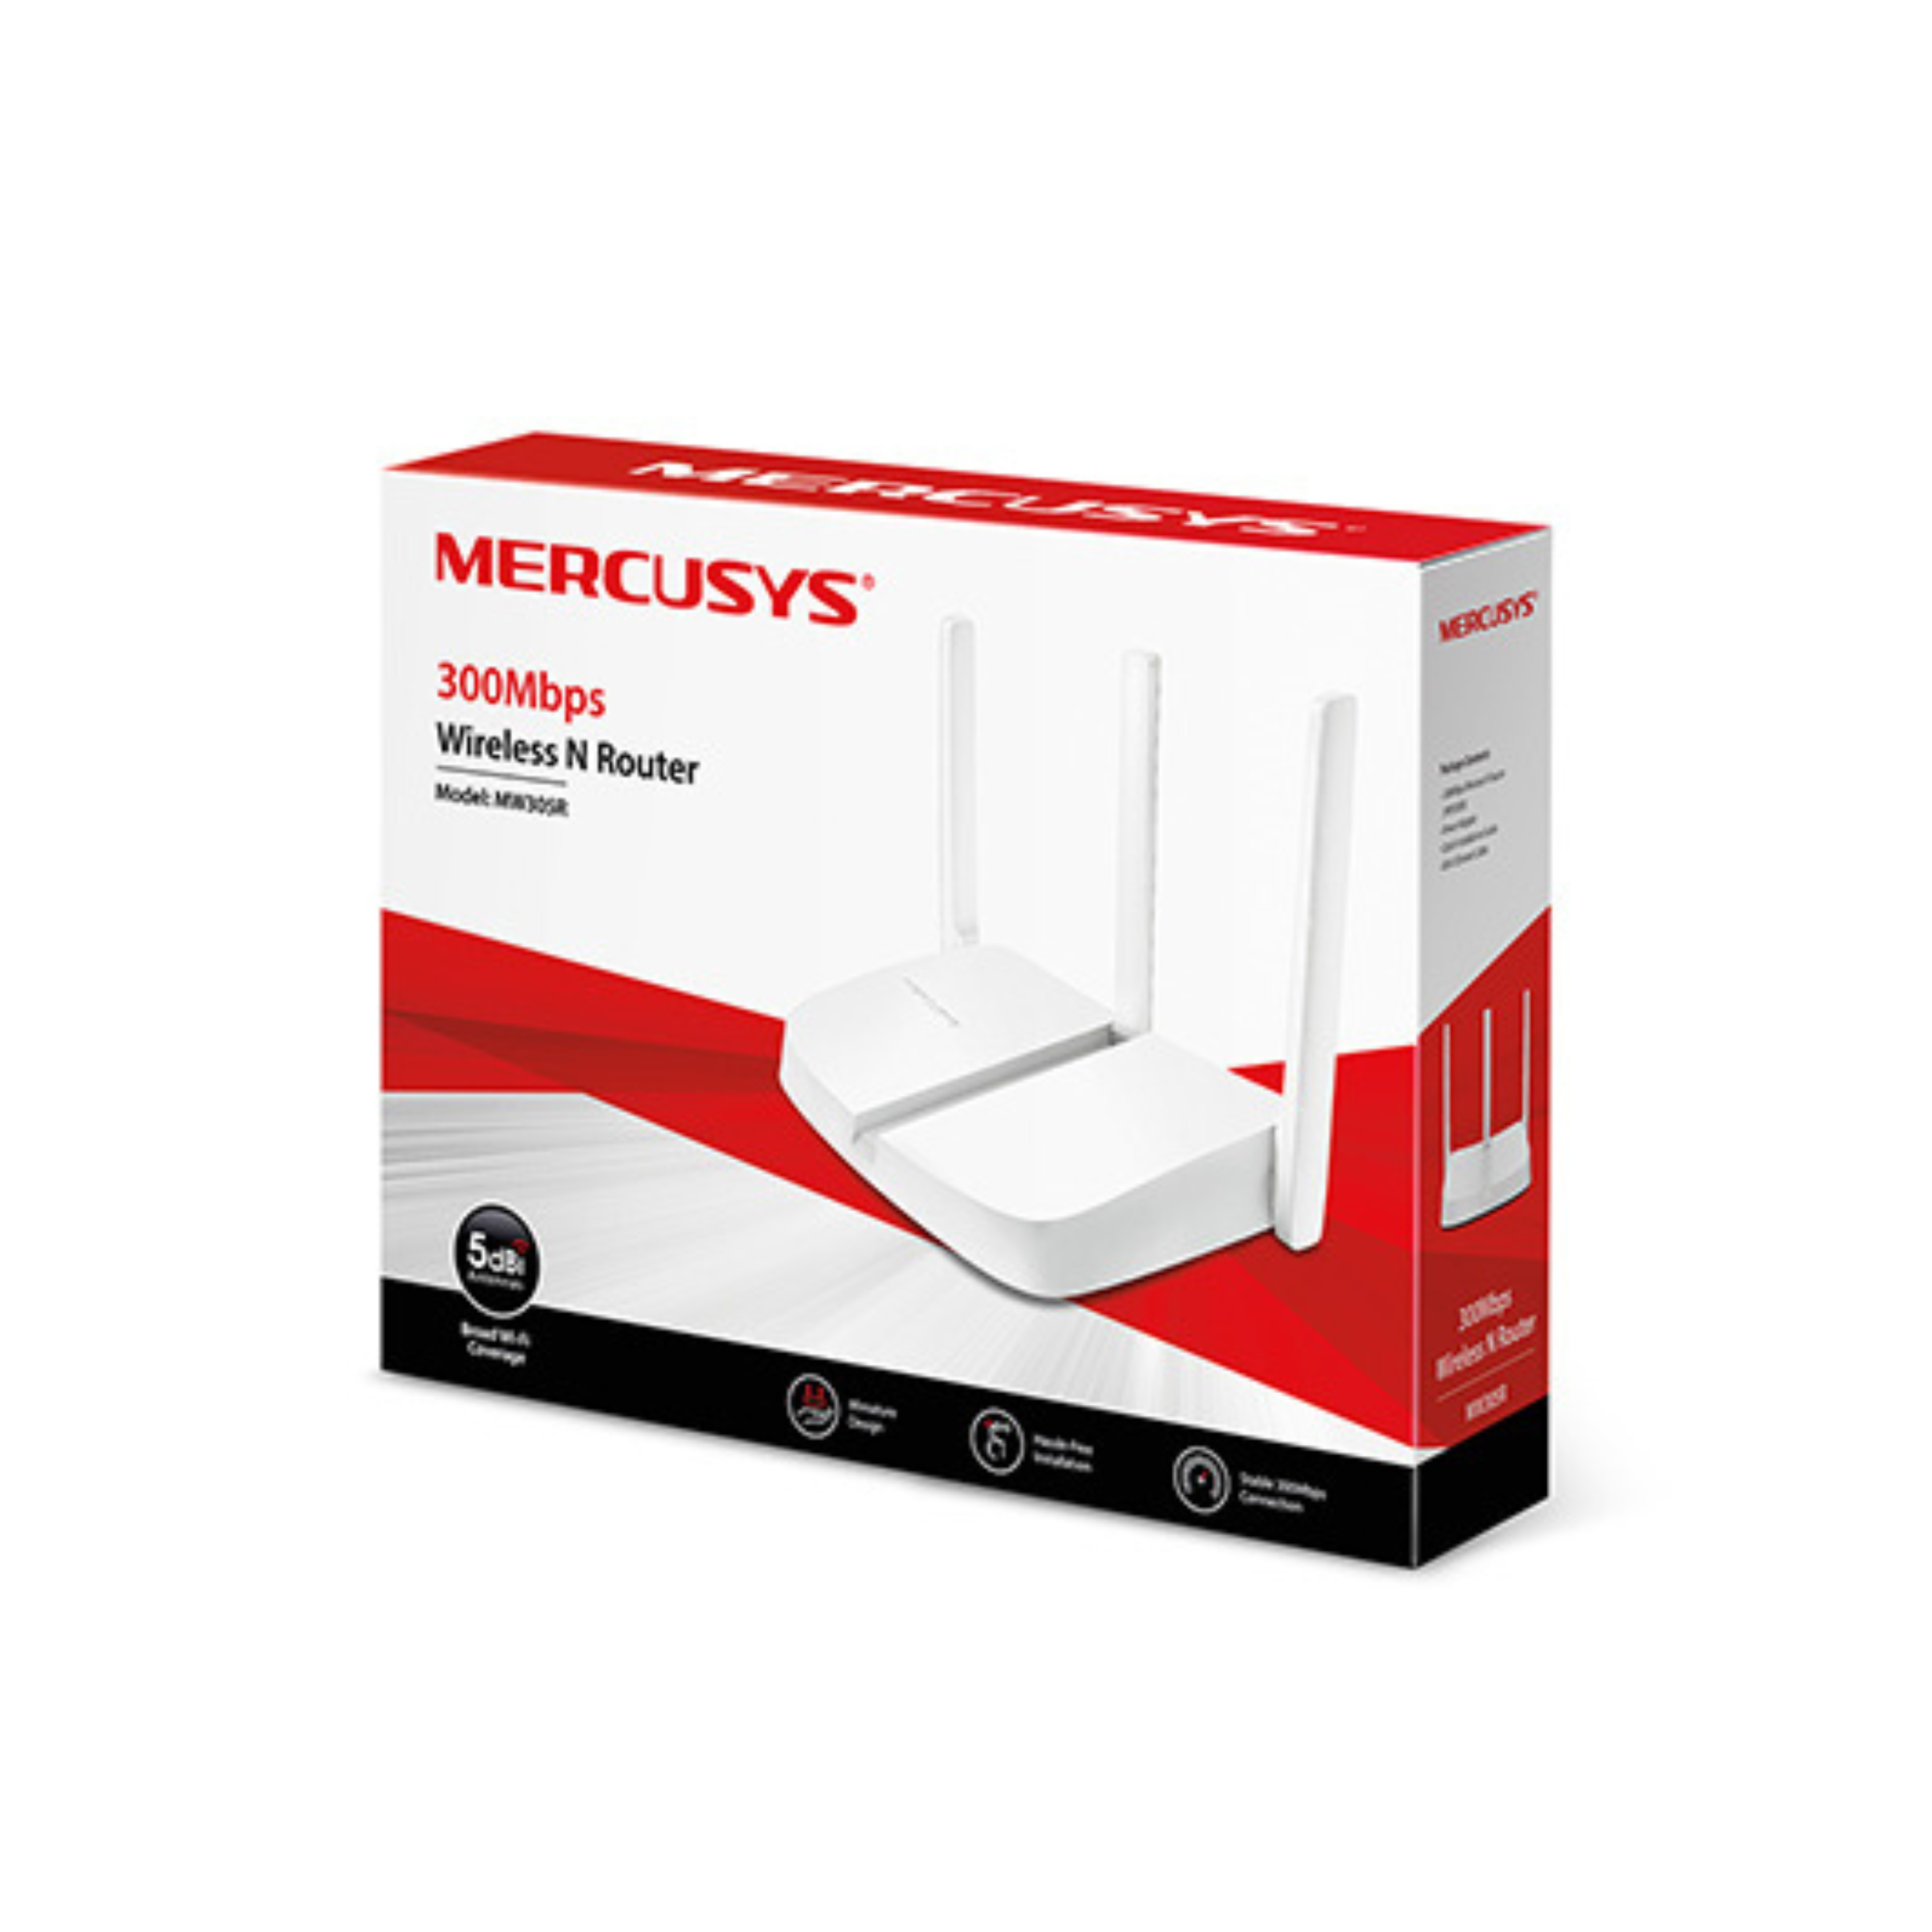 Mercusys 300Mbps Wireless N Routers